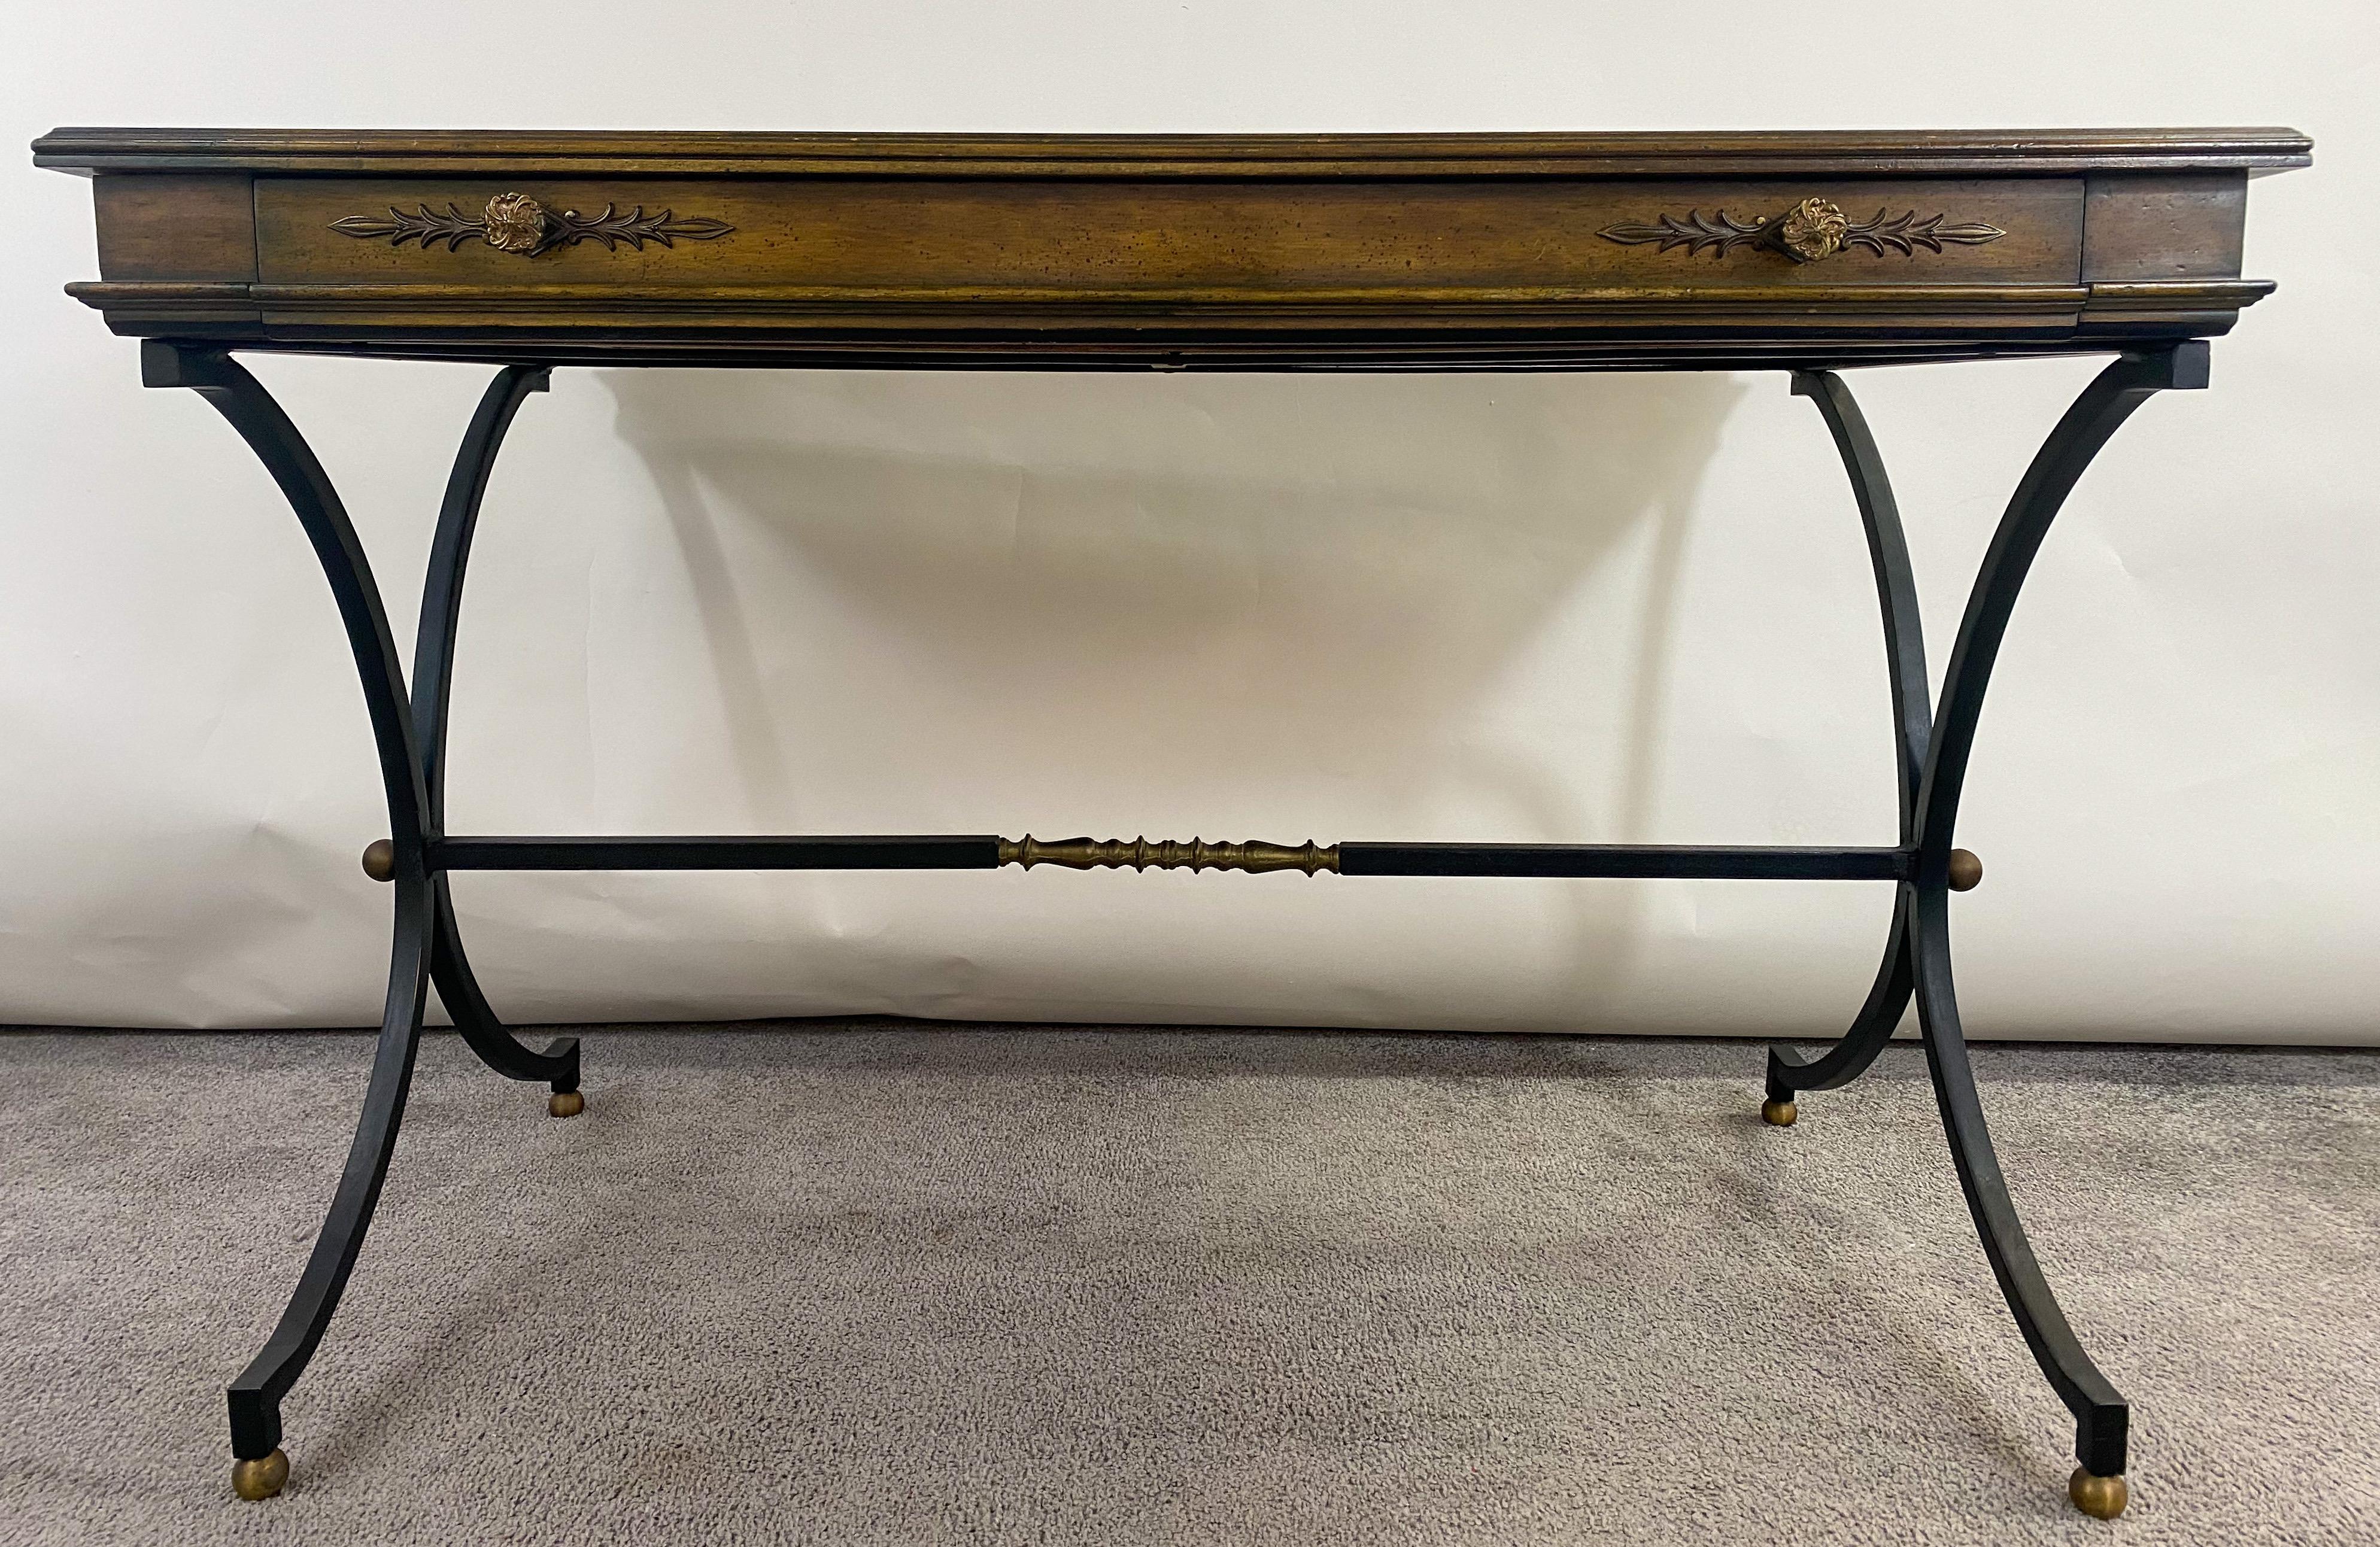 A classy mid-20th century French Hollywood Regency style writing desk. The desk is made of solid mahogany and has one large drawer standing on cast iron scissor legs with brass ornaments. The drawer is embellished with original brass pulls having